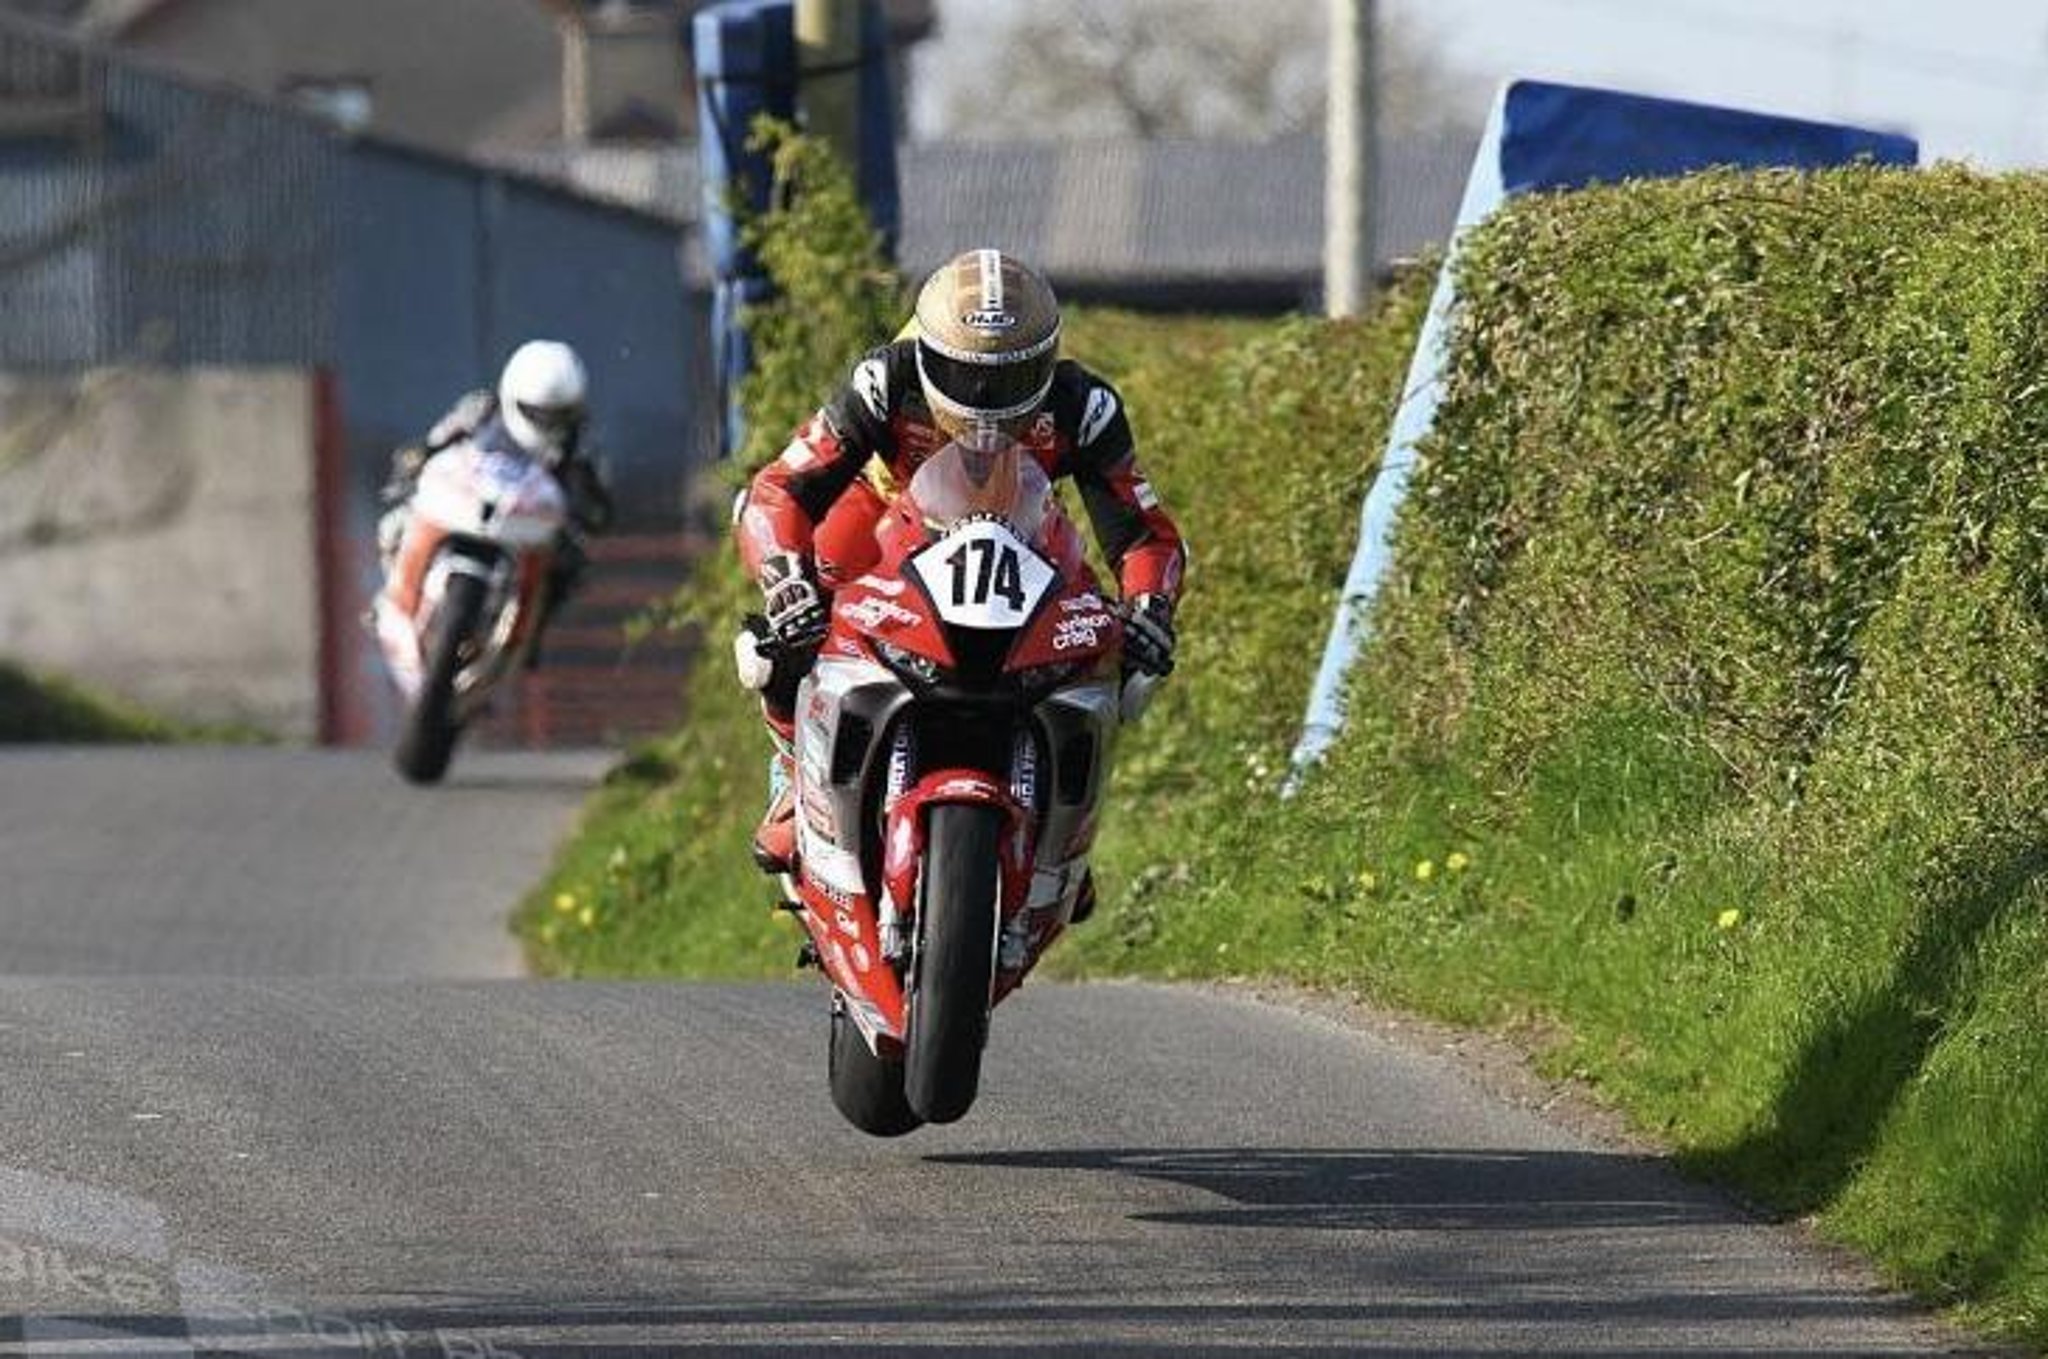 Joey Thompson wasn't prepared to 'risk his life' at Tandragee 100